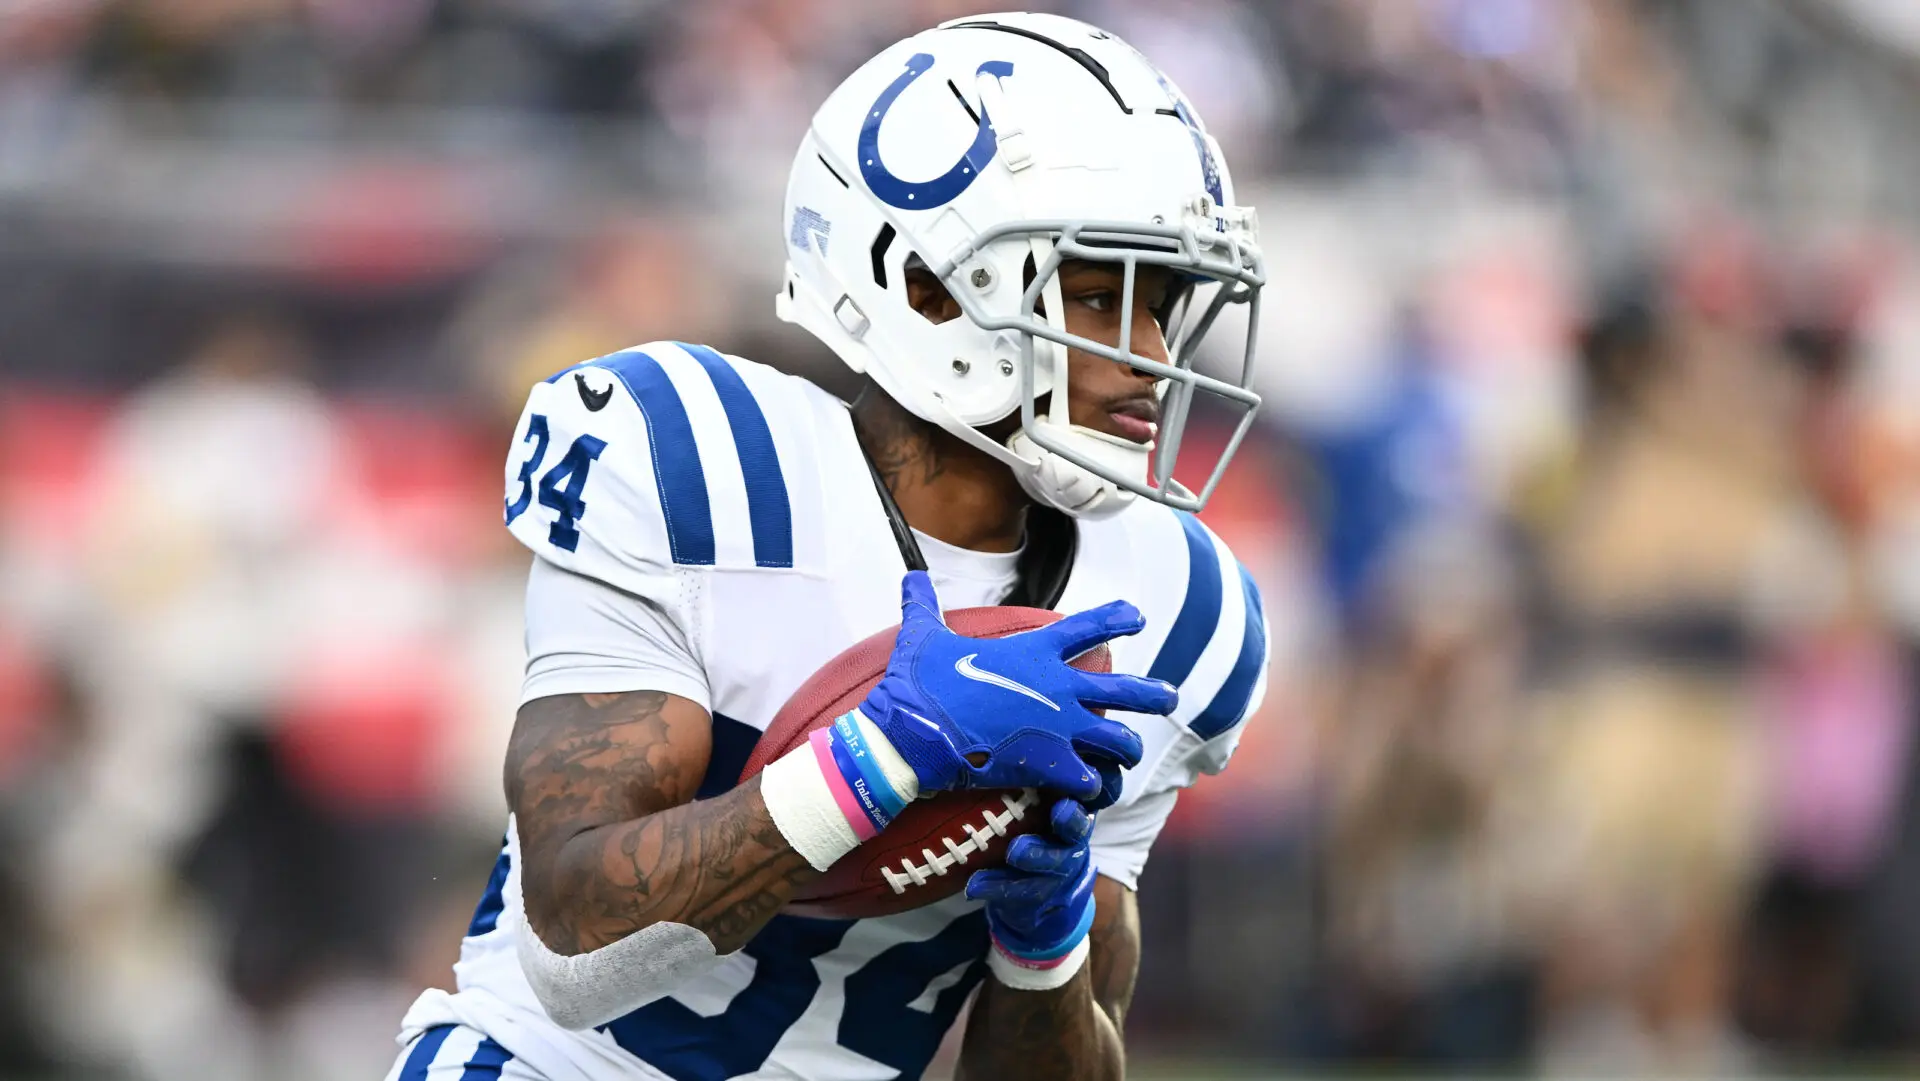 Colts' Special Teams Gets Some Love In Pro Football Focus' Week 10